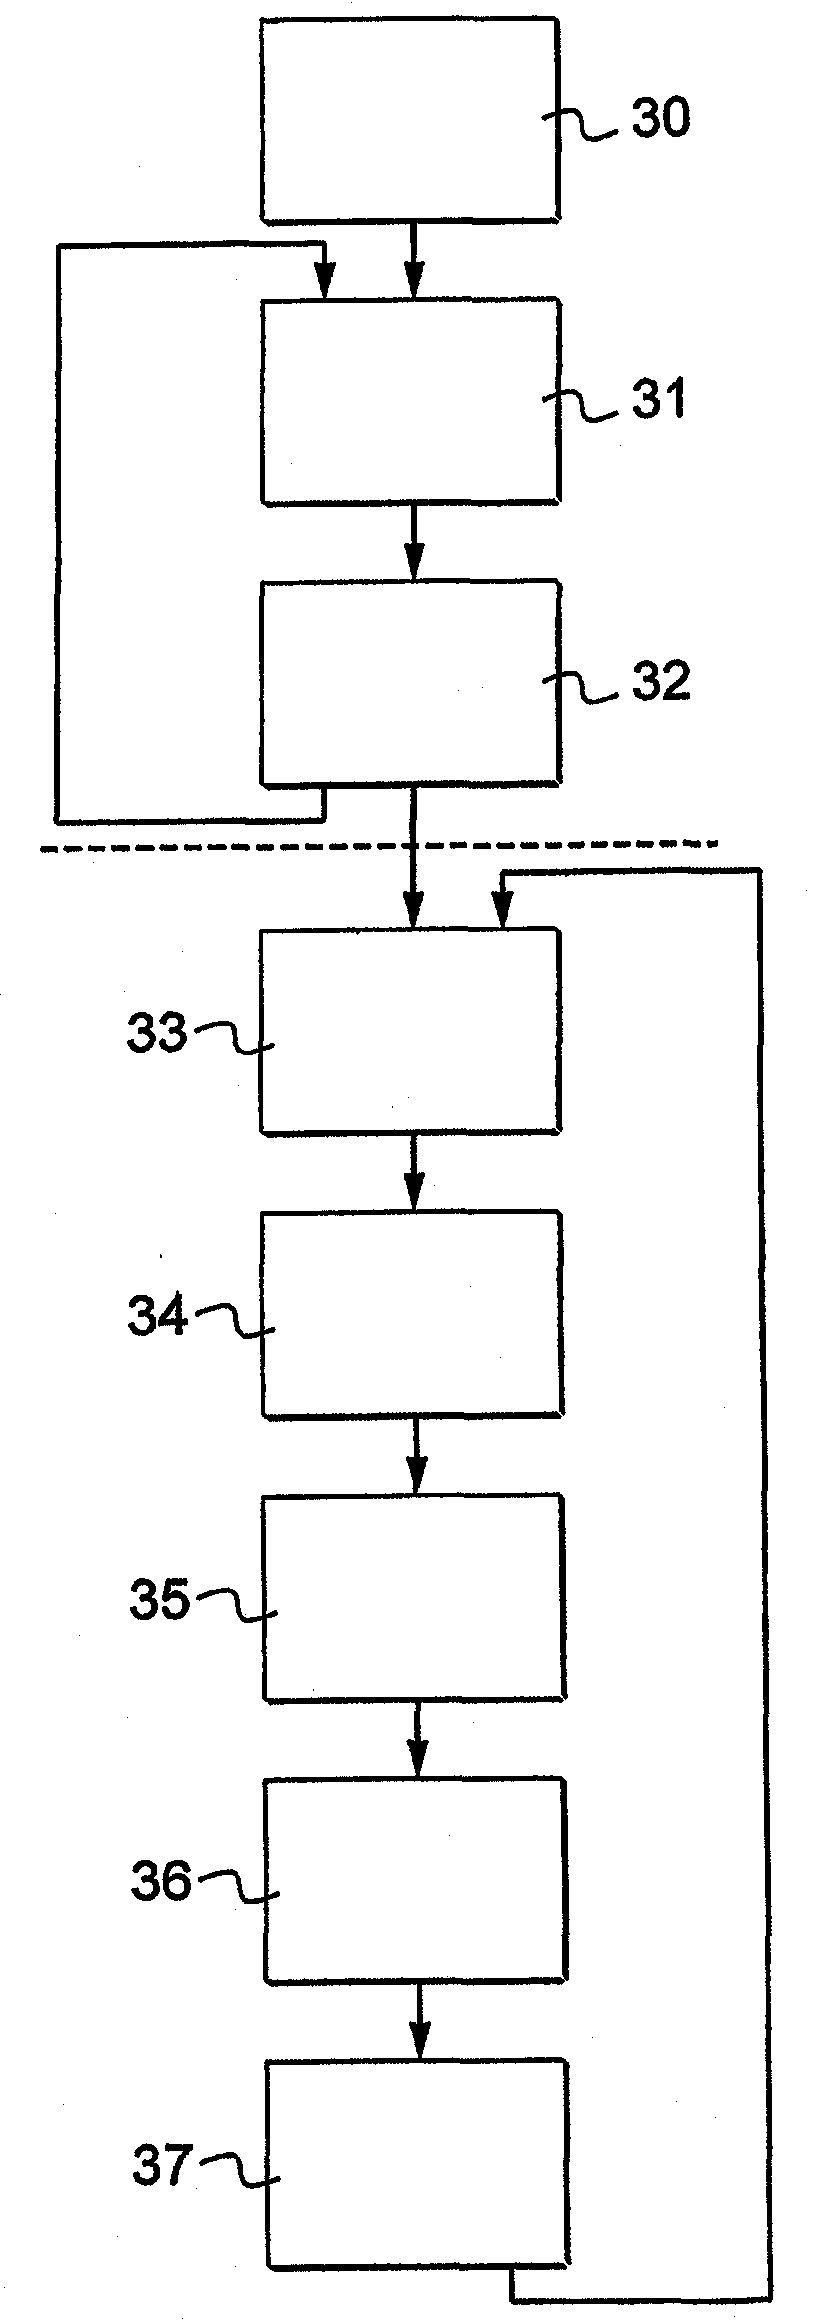 Interactive system and control method for lighting and/or image diffusion